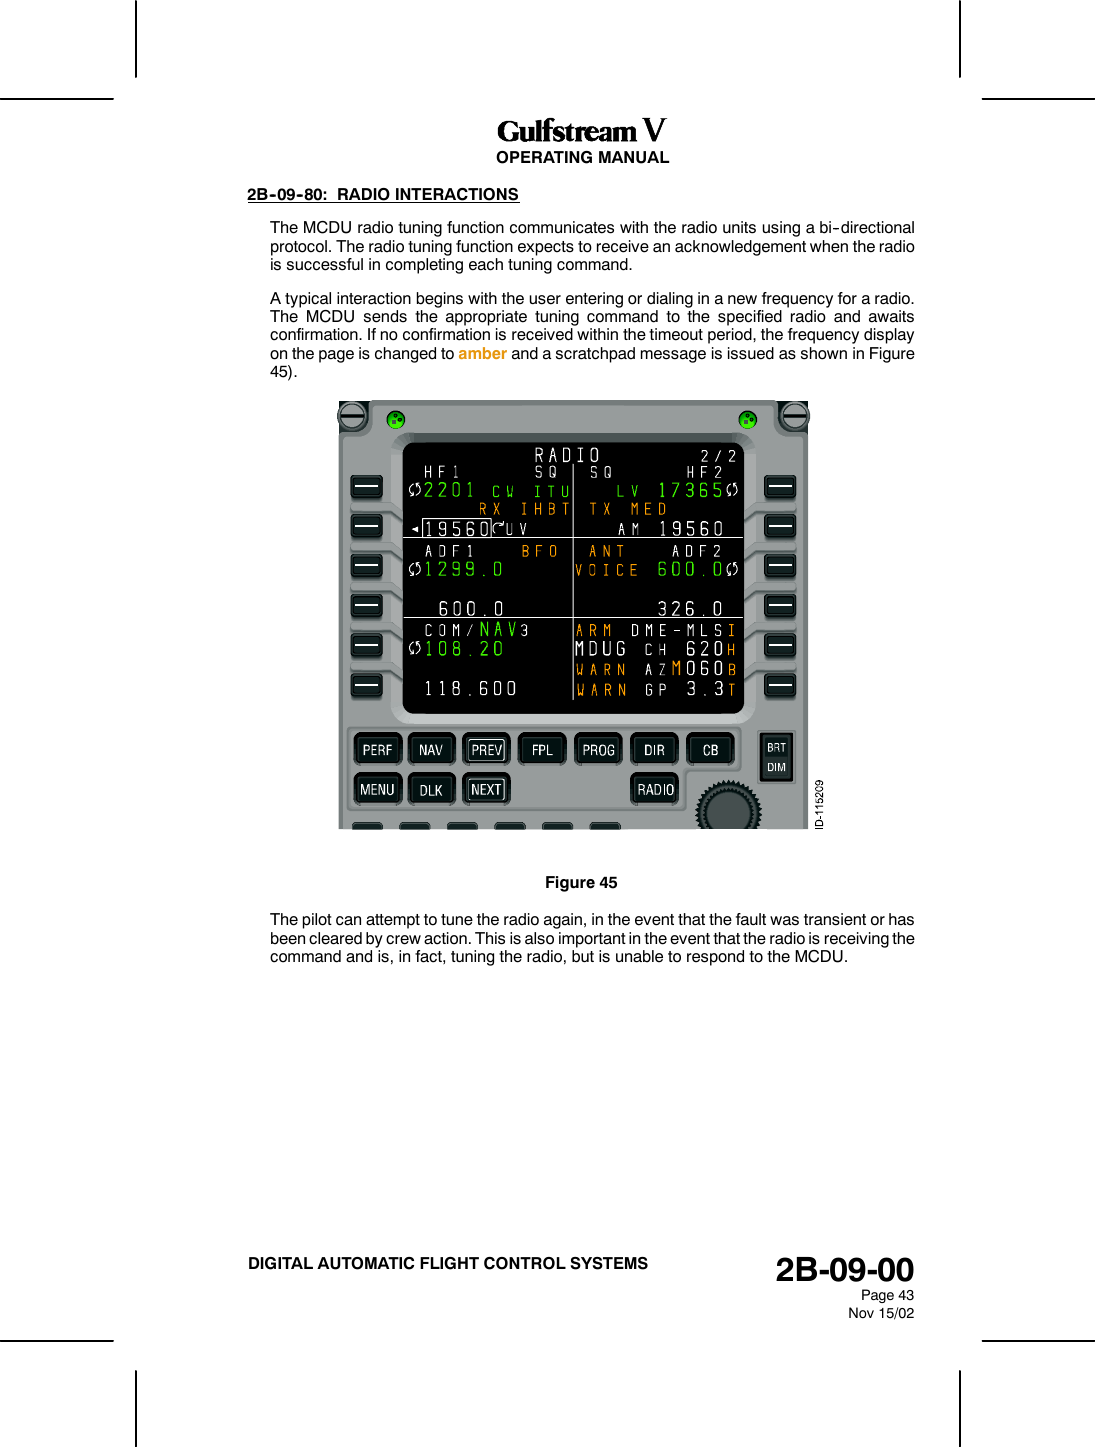 OPERATING MANUAL2B-09-00Page 43Nov 15/02DIGITAL AUTOMATIC FLIGHT CONTROL SYSTEMS2B--09--80: RADIO INTERACTIONSThe MCDU radio tuning function communicates with the radio units using a bi--directionalprotocol. The radio tuning function expects to receive an acknowledgement when the radiois successful in completing each tuning command.A typical interaction begins with the user entering or dialing in a new frequency for a radio.The MCDU sends the appropriate tuning command to the specified radio and awaitsconfirmation. If no confirmation is received within the timeout period, the frequency displayon the page is changed to amber and a scratchpad message is issued as shown in Figure45).Figure 45The pilot can attempt to tune the radio again, in the event that the fault was transient or hasbeen cleared by crew action. This is also important in the event that the radio is receiving thecommand and is, in fact, tuning the radio, but is unable to respond to the MCDU.